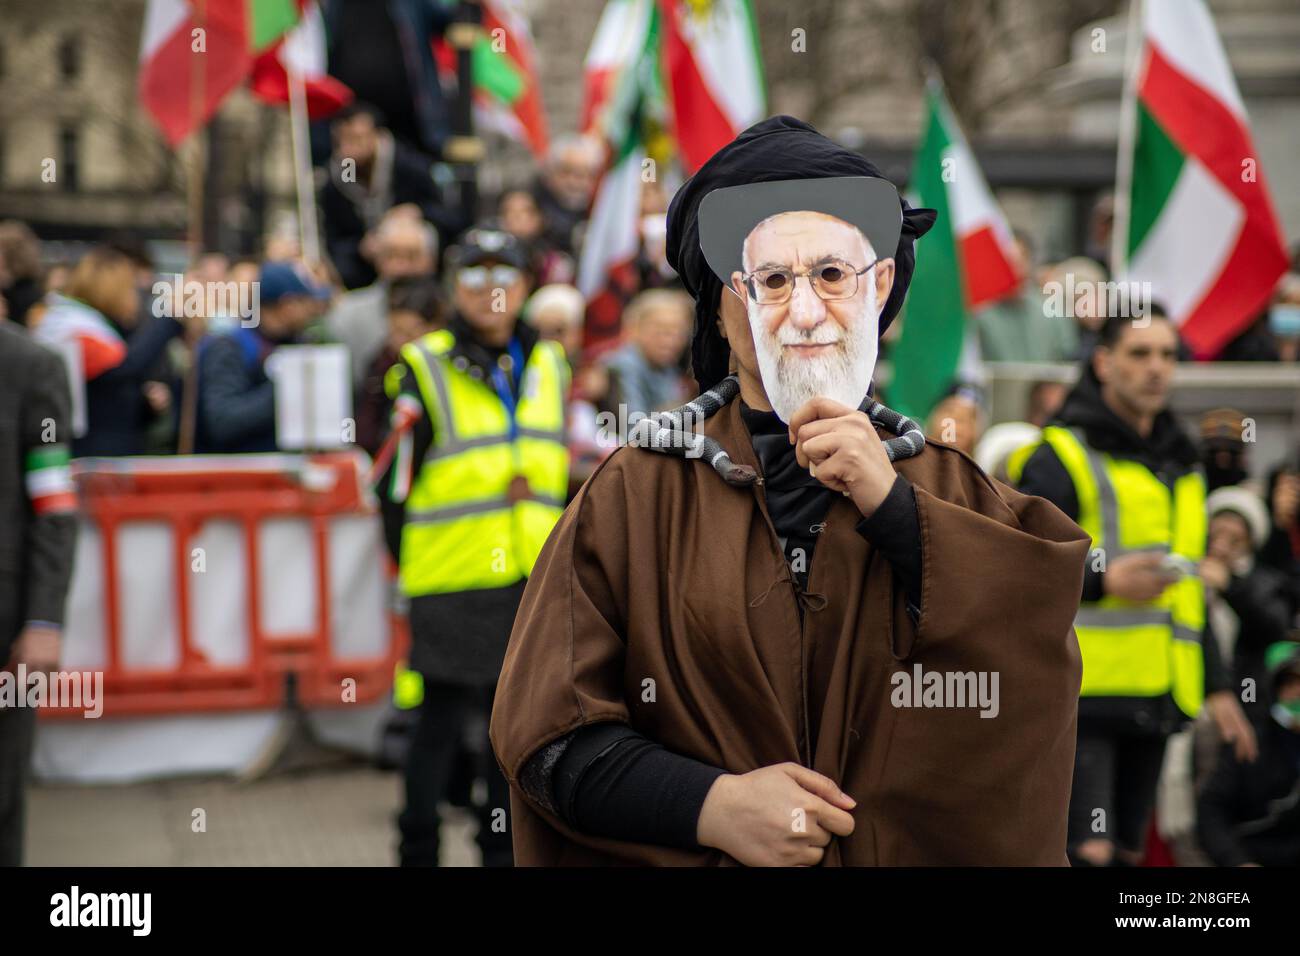 London, UK - 11 Feb 2023: Khamenei—the supreme leader of Iran—depicted in a performance by protesters. Today marks the 44th anniversary of the Islamic Revolution in Iran. After more than five months of continuous protest in support of the woman, life, freedom movement, Thousands of protesters gathered in Trafalgar Sq. to denounce the Regime in Iran.  Protesters were holding Shir-o-Khorshid (Lion and Sun) flag of Iran—the flag, or its emblem, were part of Iranian national identity for centuries—which was changed after the Islamic Revolution in 1979.   Credit: Sinai Noor/Alamy Live News Stock Photo